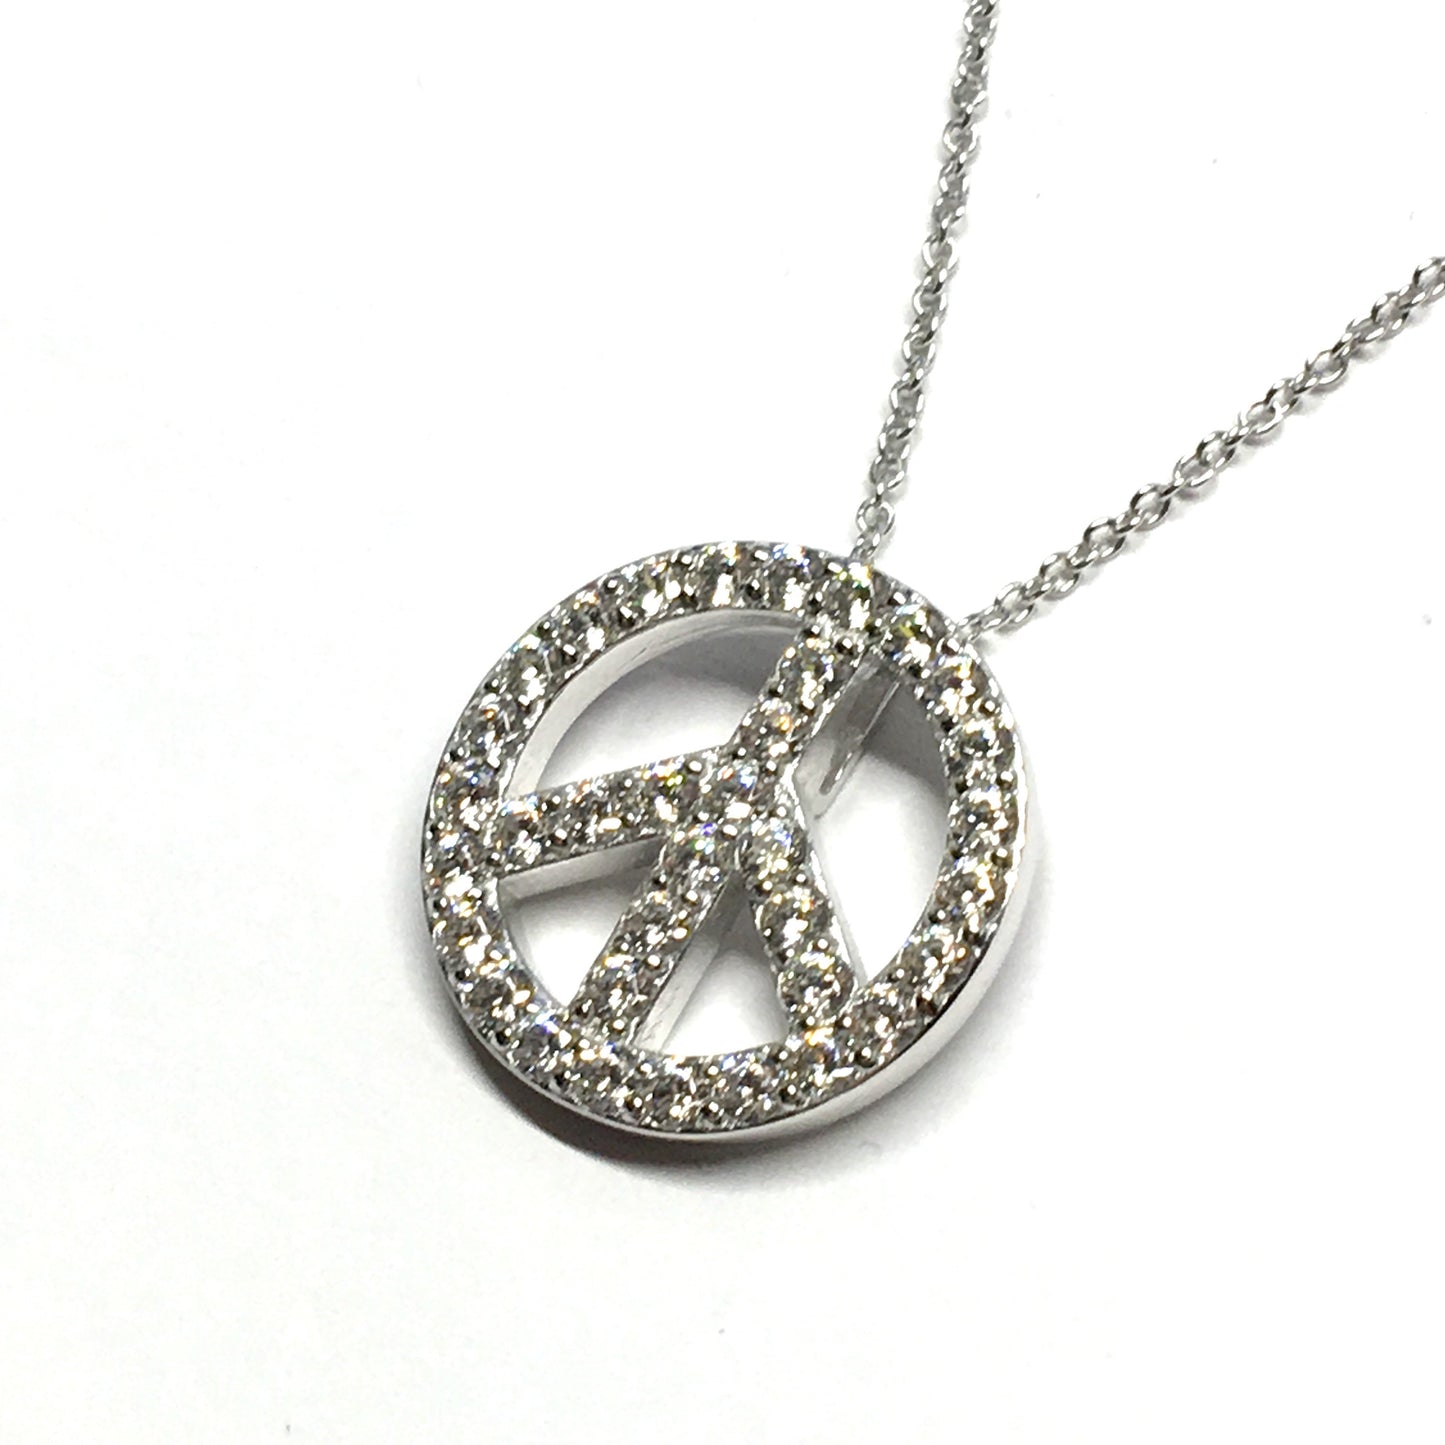 Jewelry > Necklaces | STATEMENT Stunning Sparkly Sterling Silver Peace Symbol Pendant Necklace  - Blingschlingers Jewelry